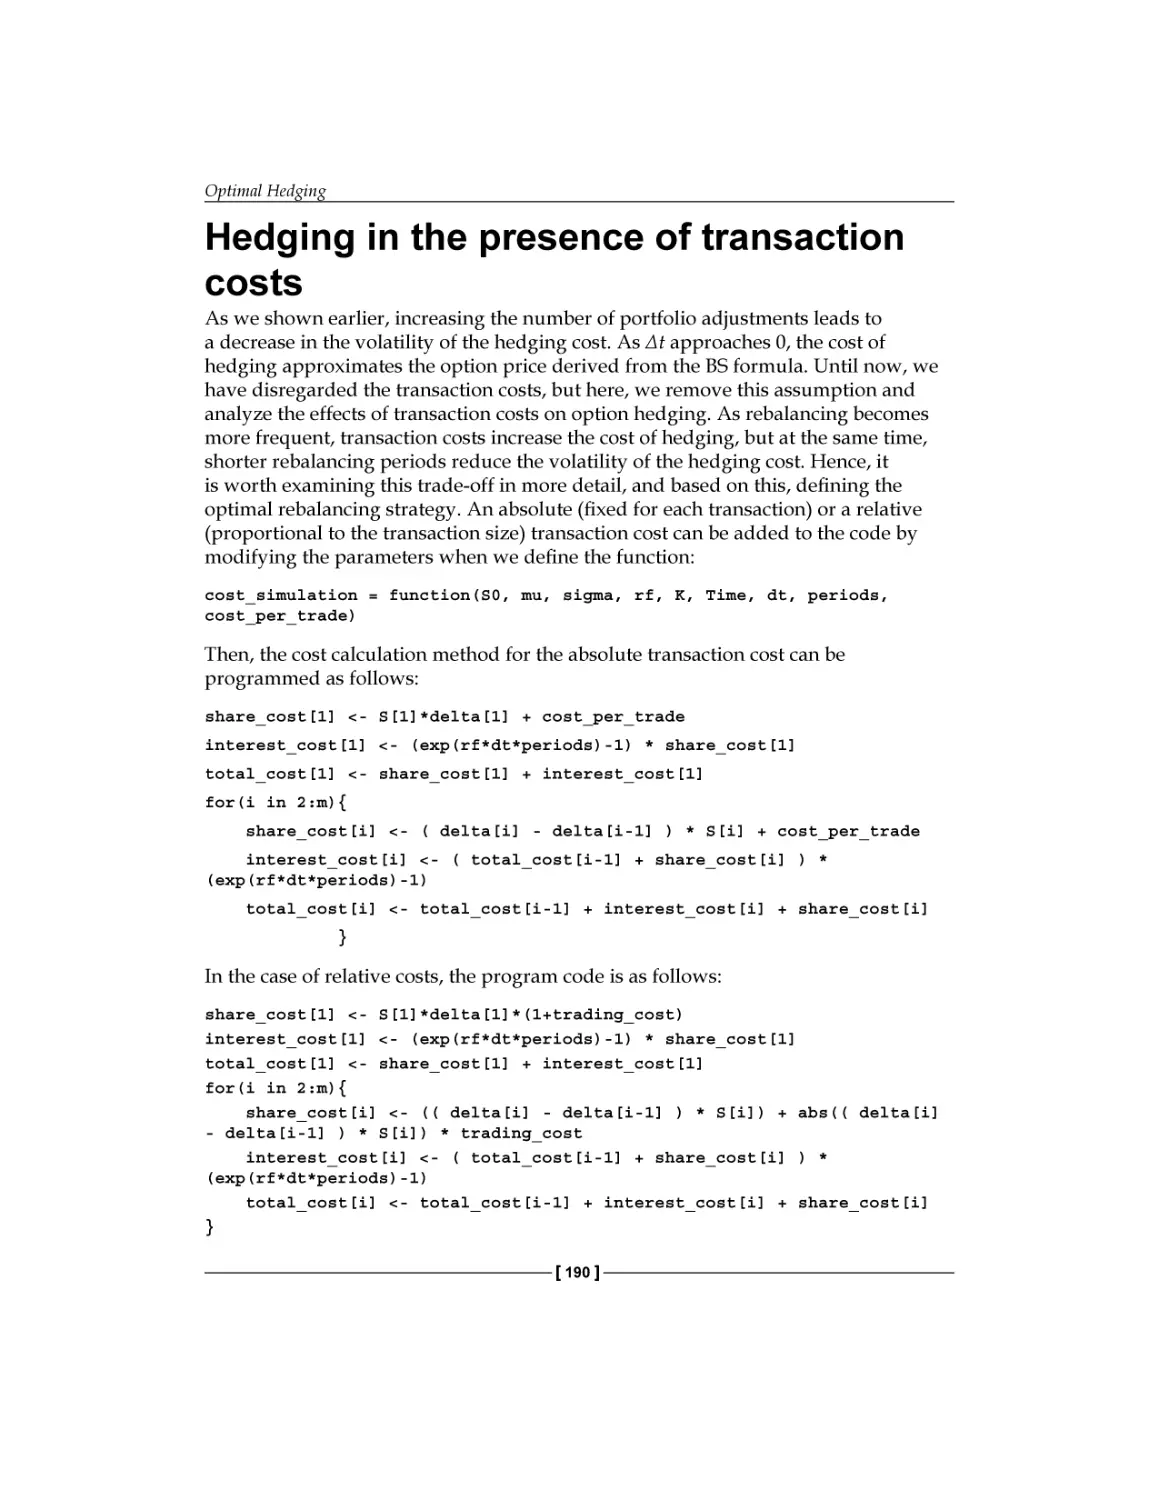 Hedging in the presence of transaction costs